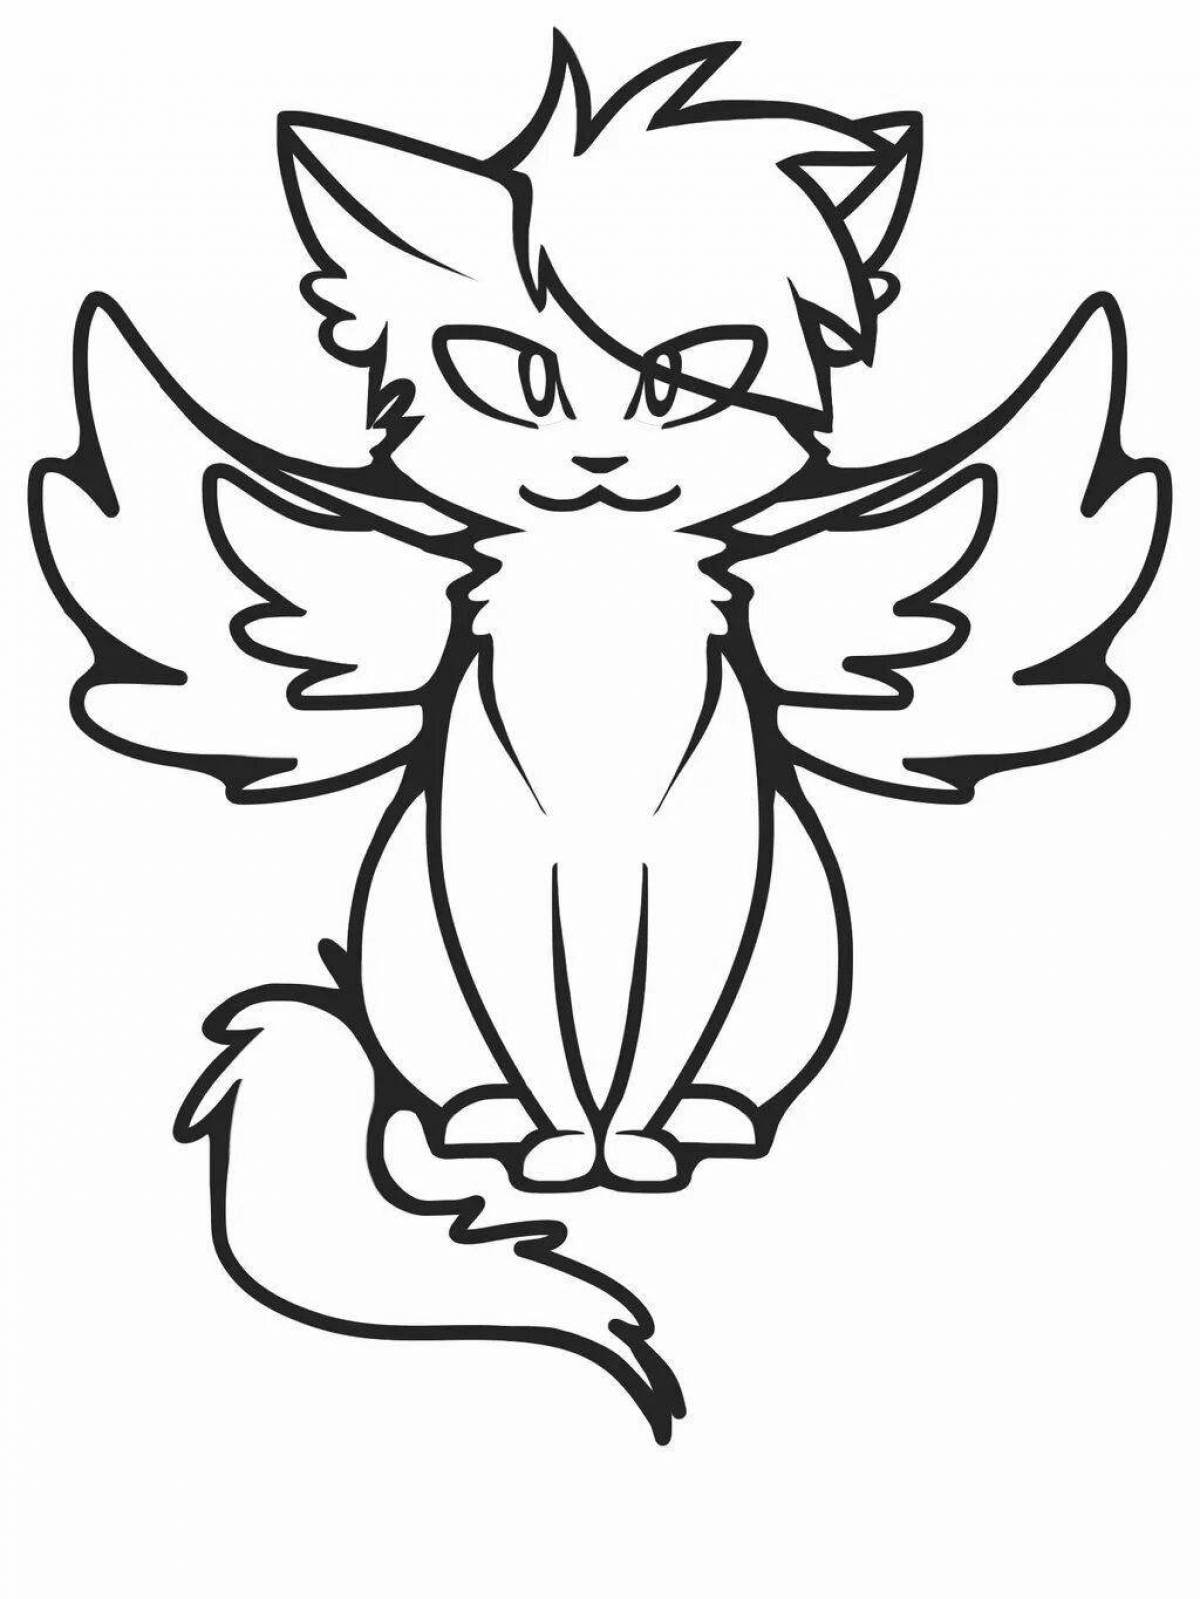 Adorable flying cat coloring page